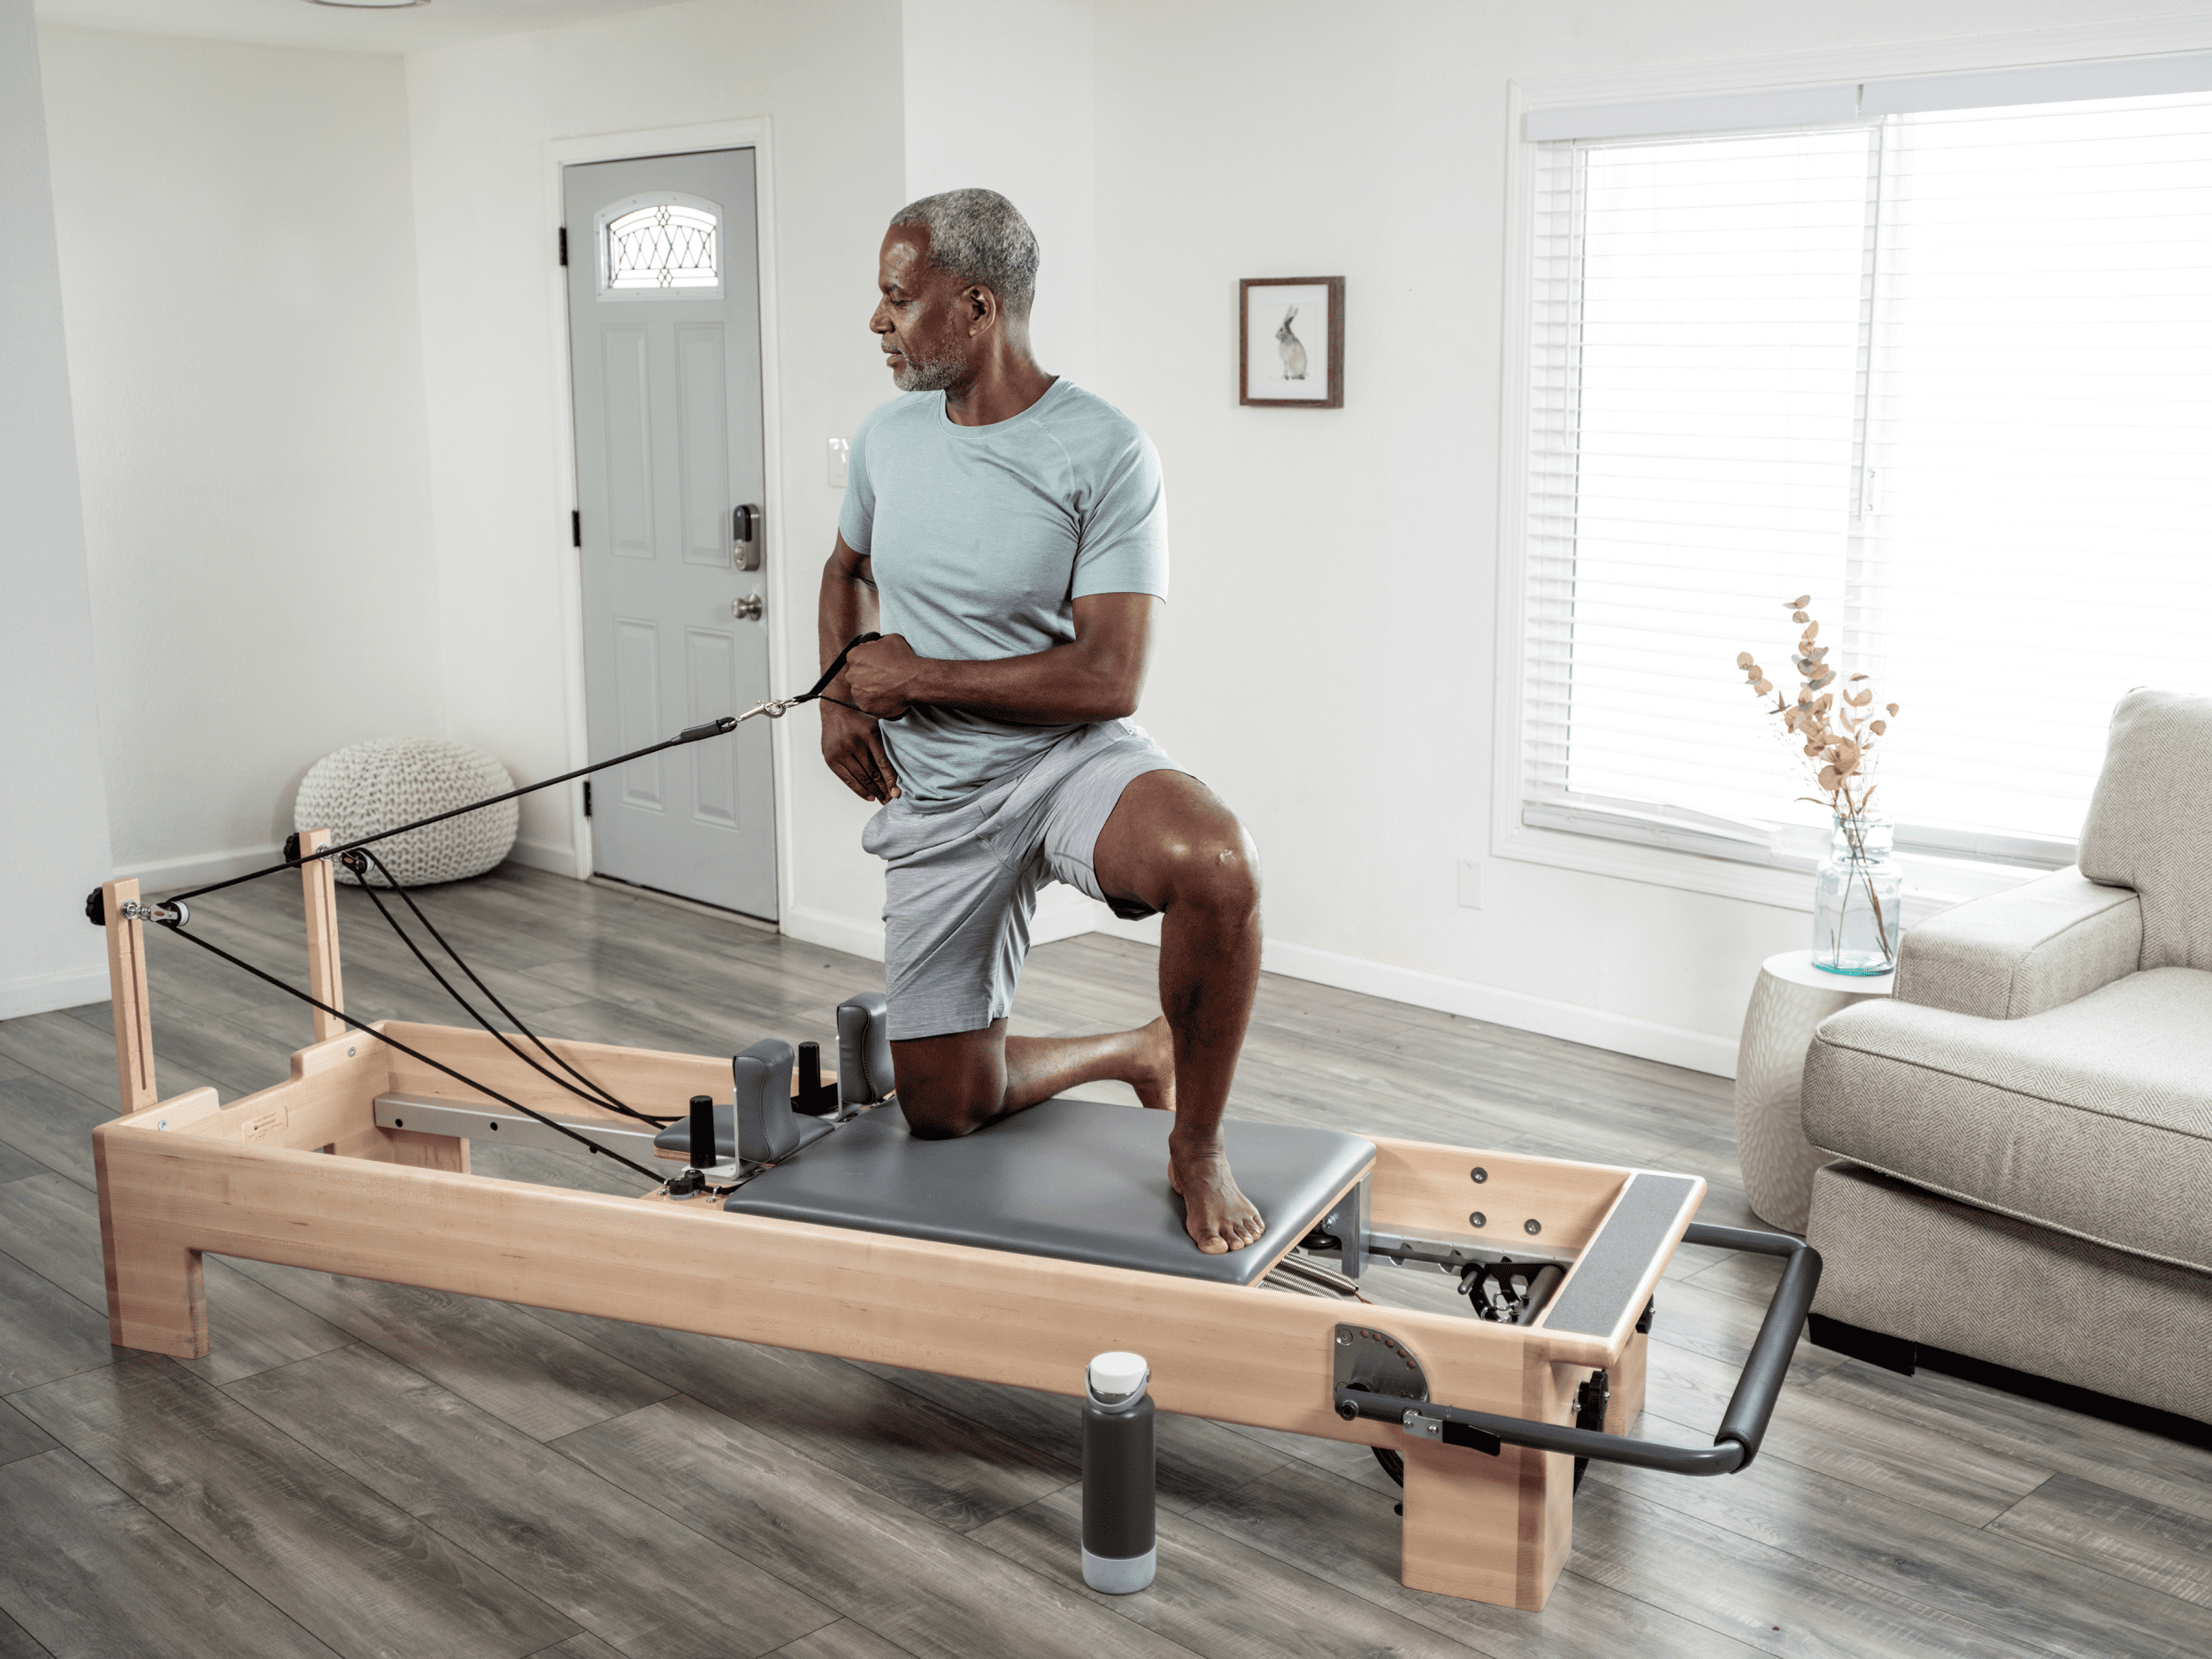 Ever wondered what goes into setting up a dream Pilates reformer